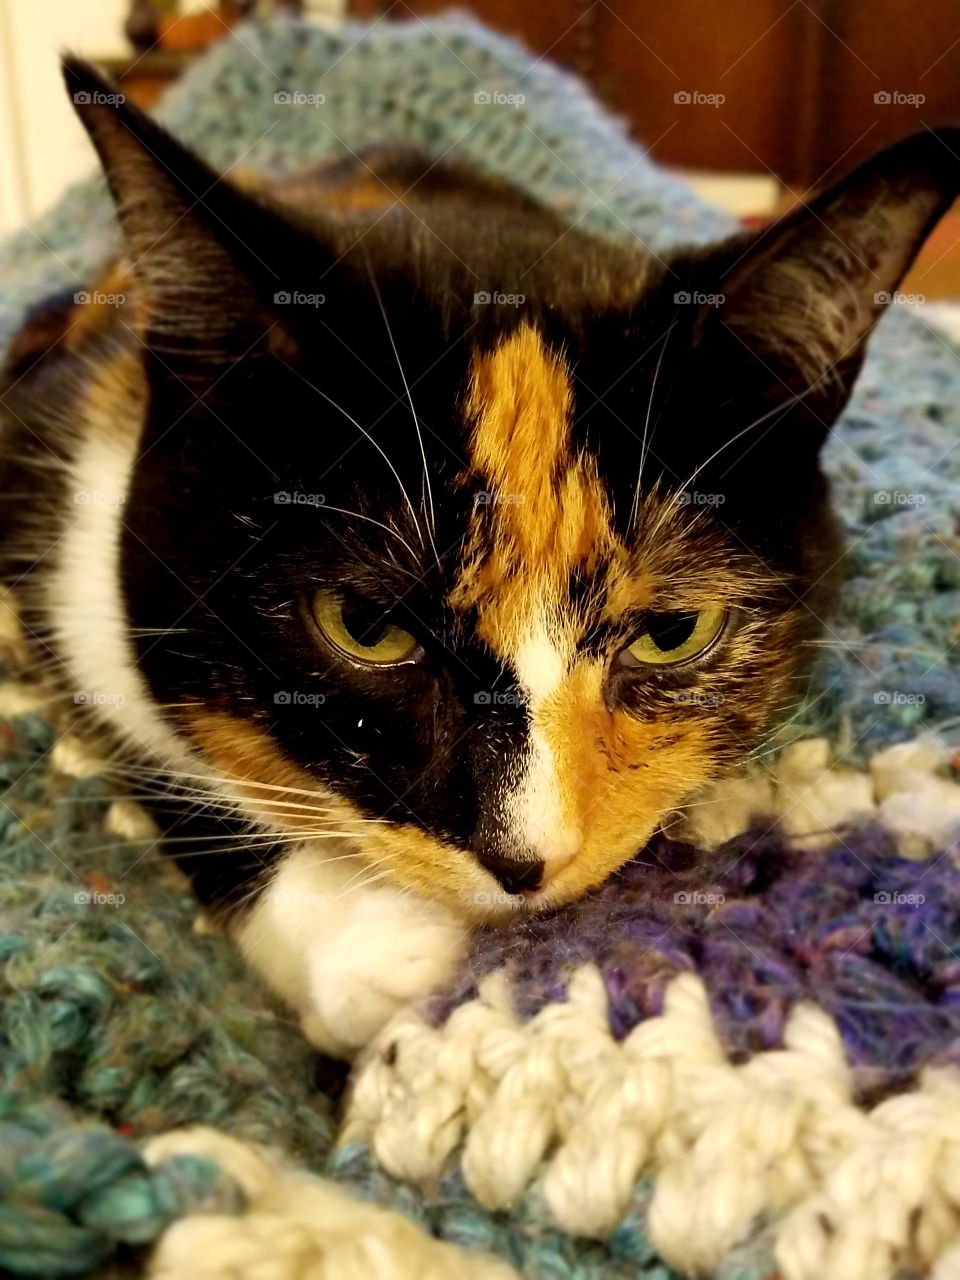 Calico Kitty all Snuggled in